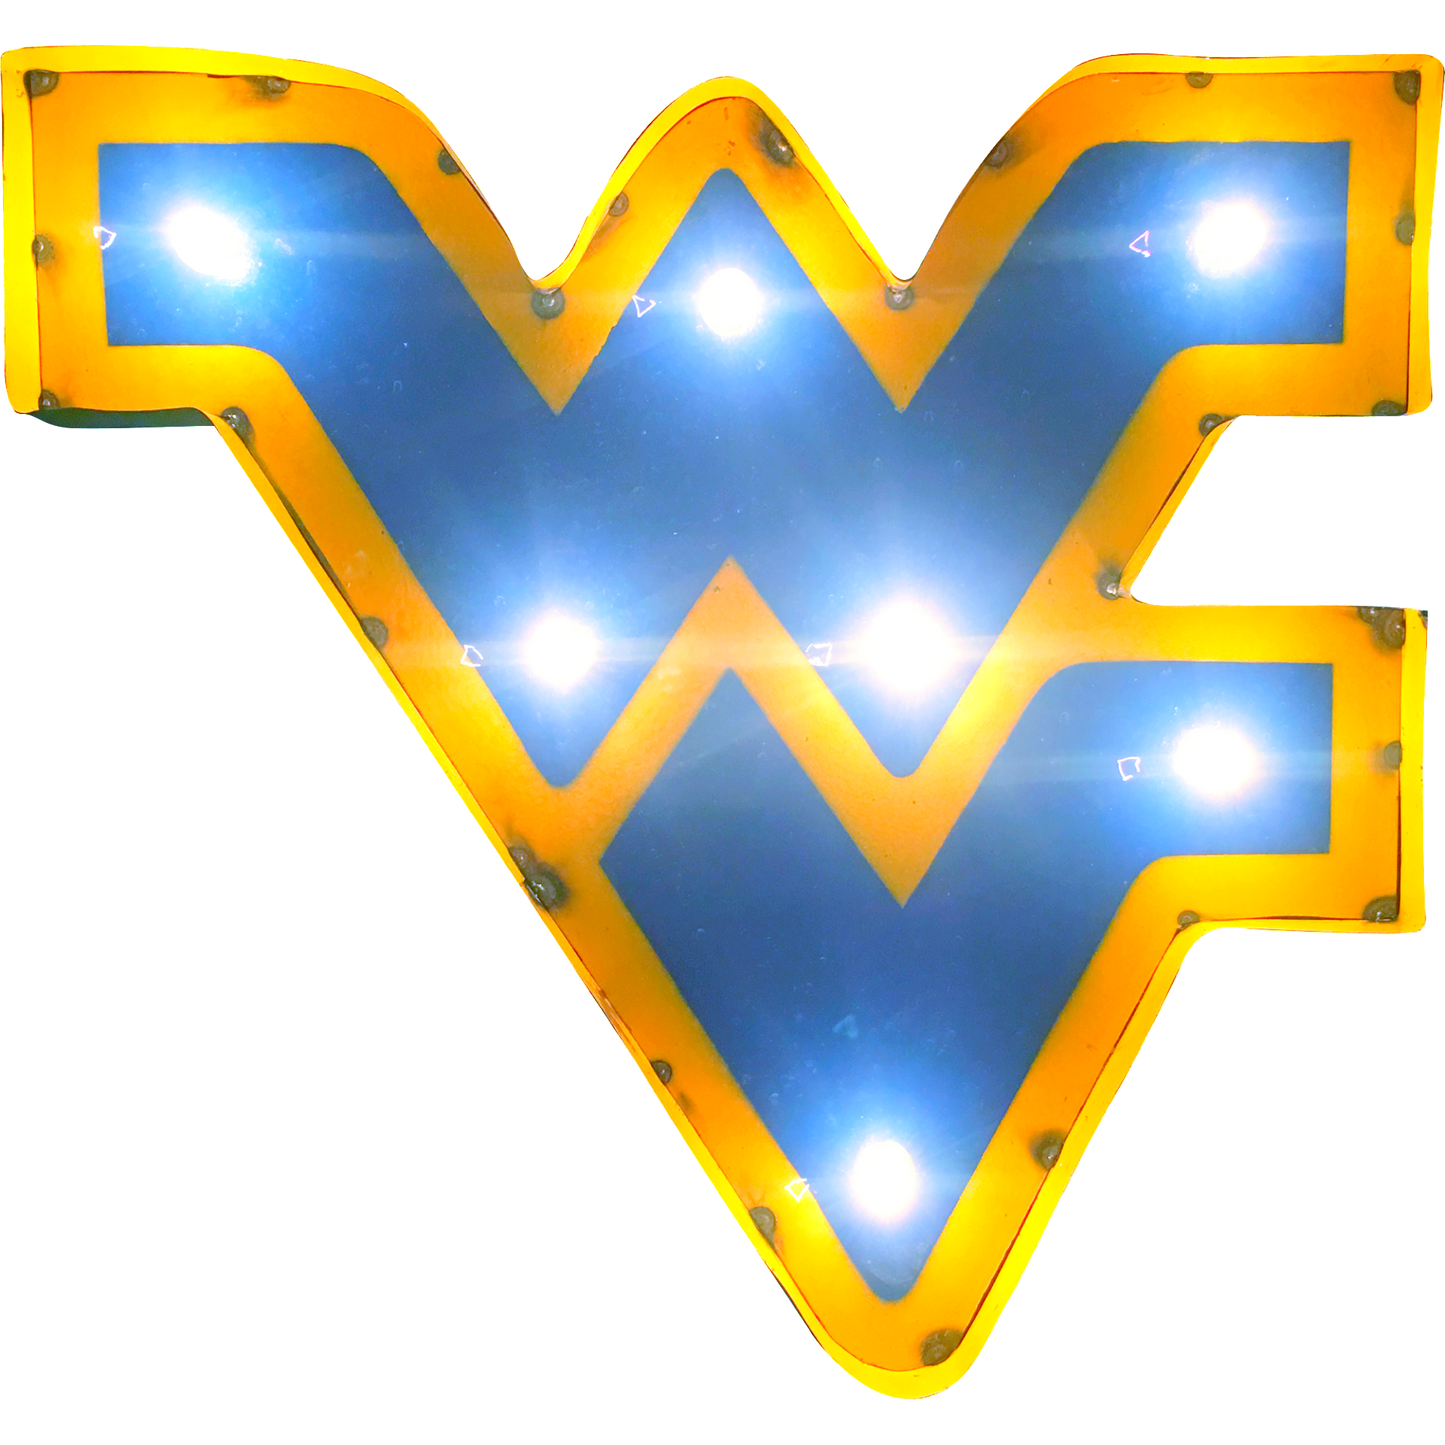 West Virginia University "WV" Lighted Recycled Metal Wall Decor